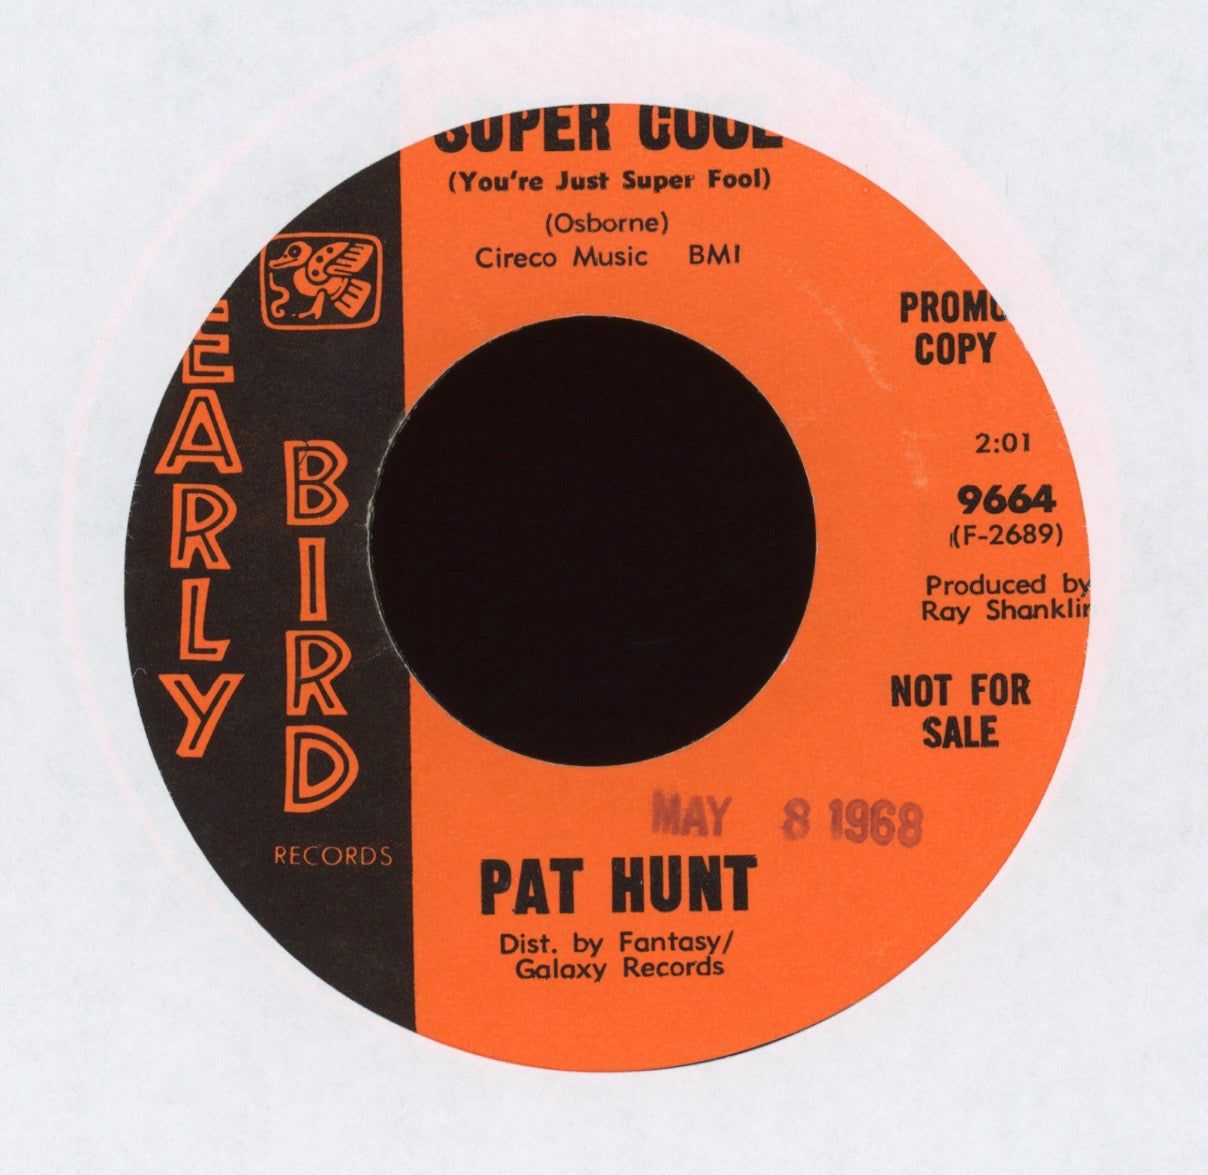 Pat Hunt - Super Cool (You're Just Super Fool) on Early Bird Promo Funk 45